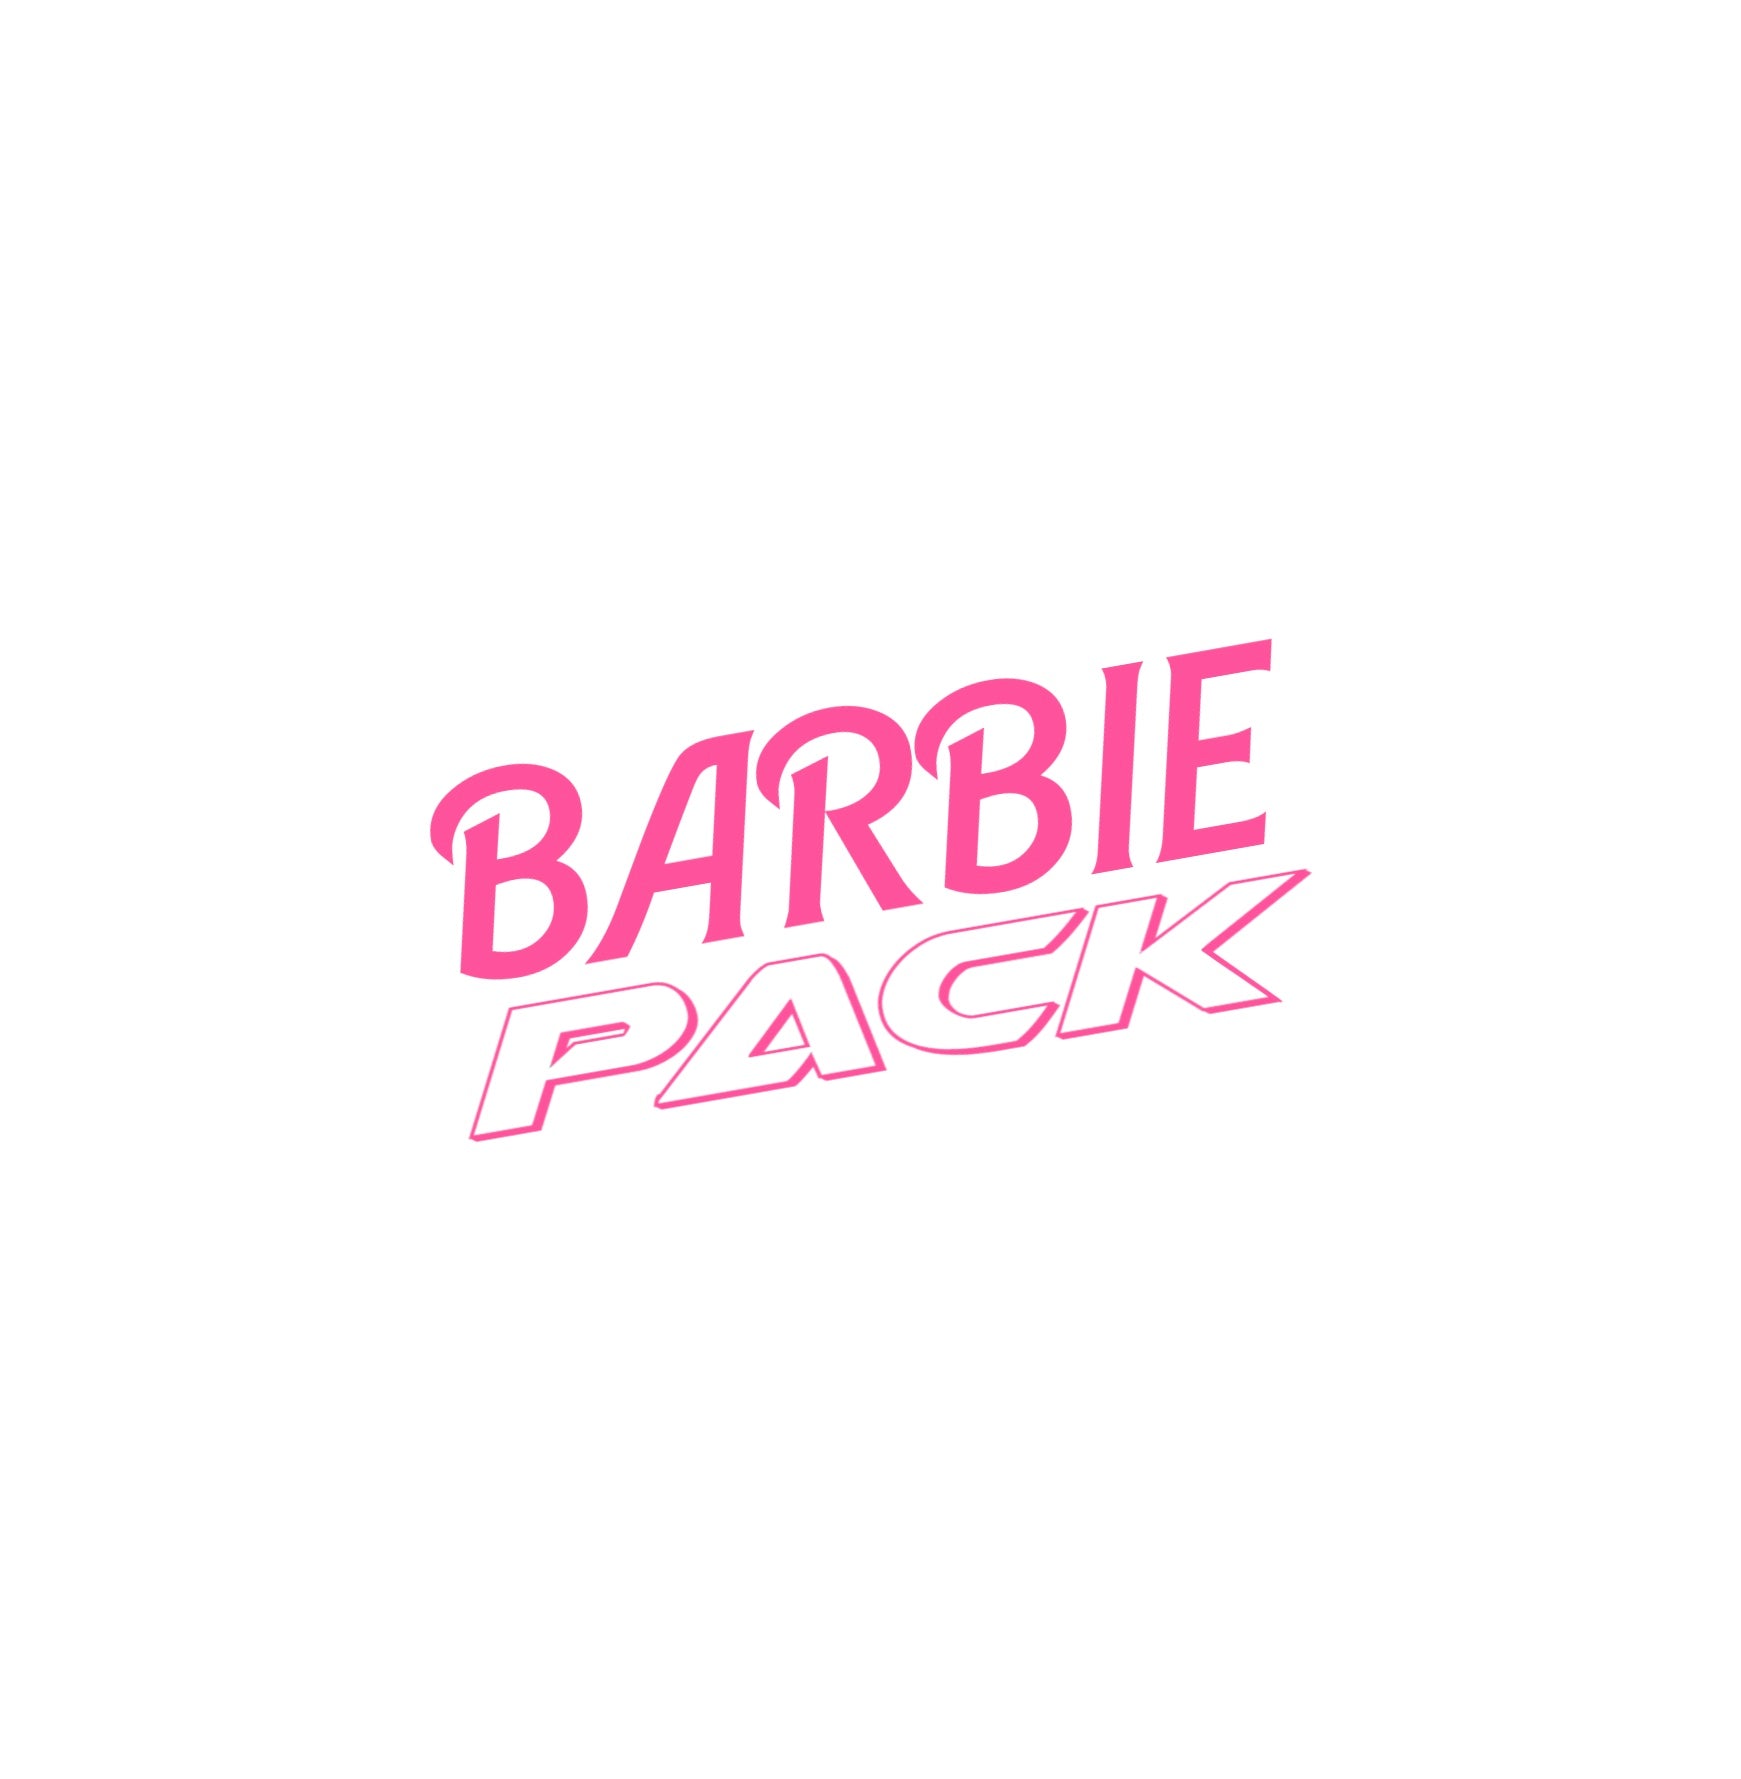 Lifter Pack - Barbie